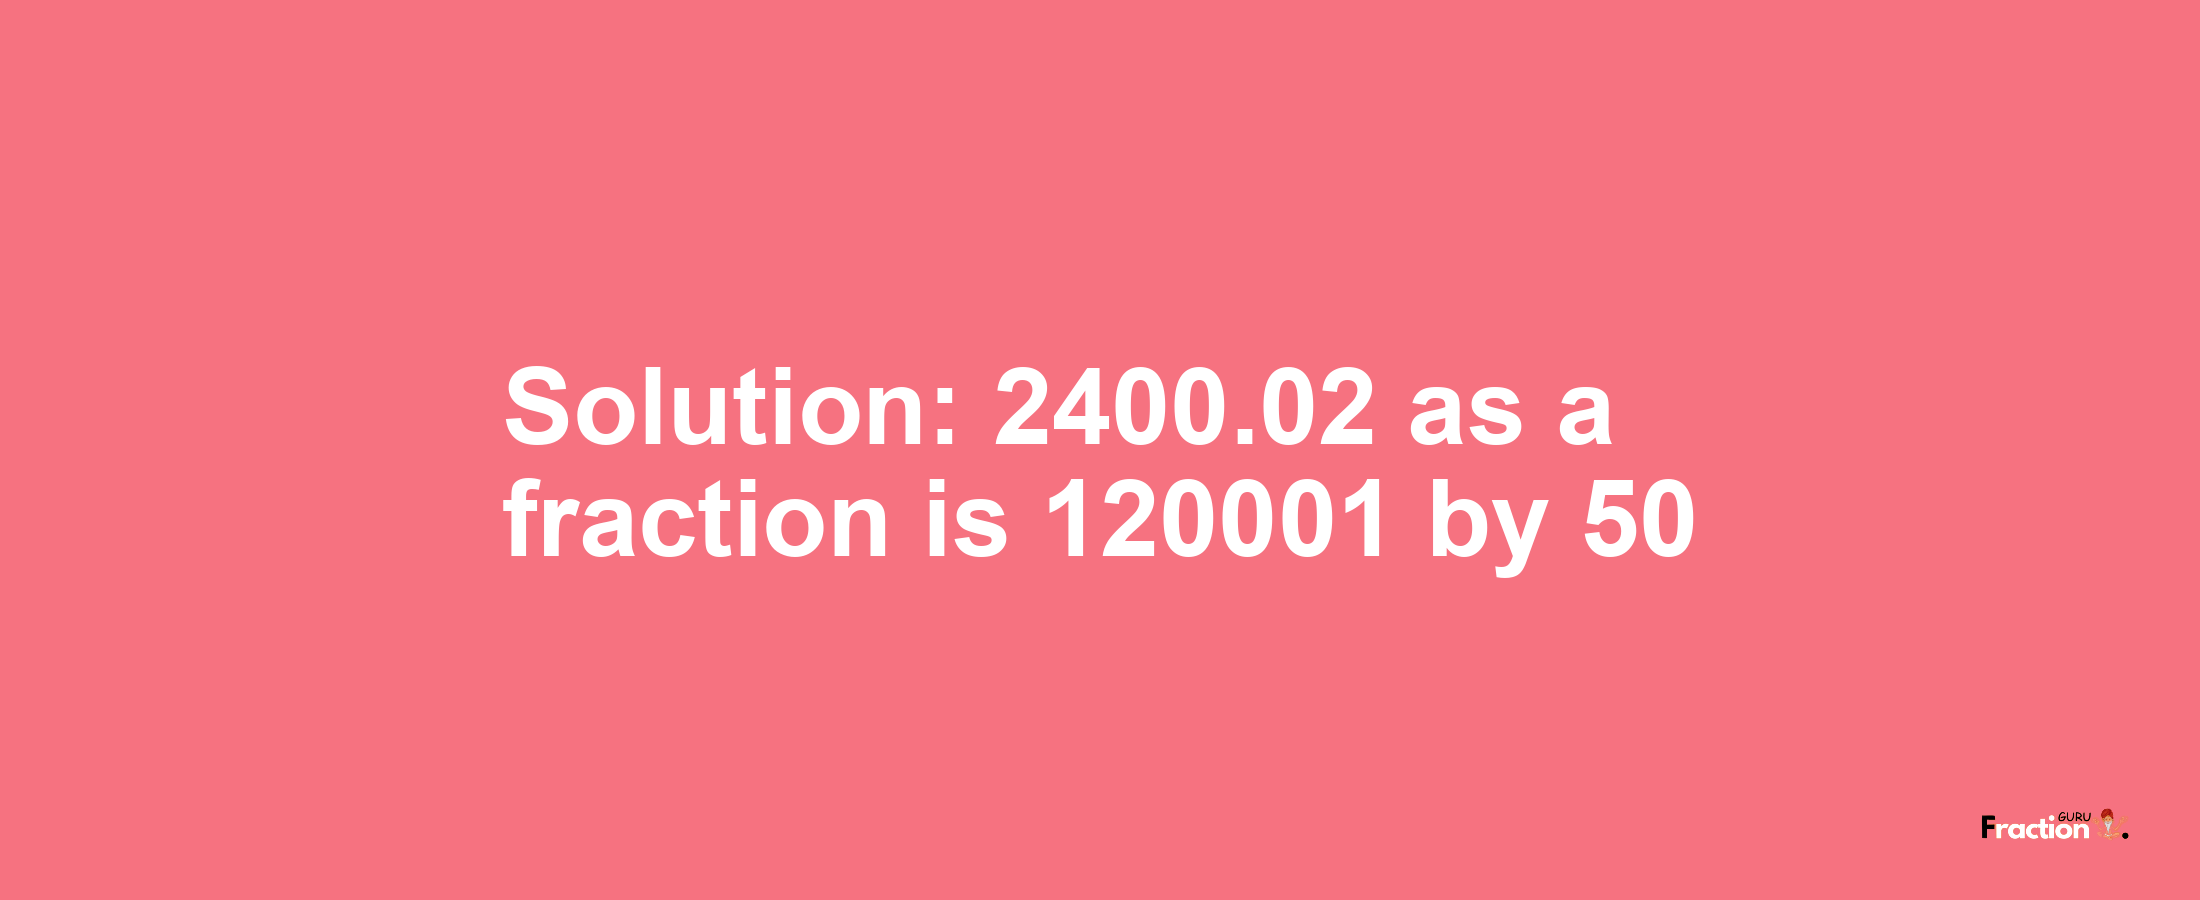 Solution:2400.02 as a fraction is 120001/50